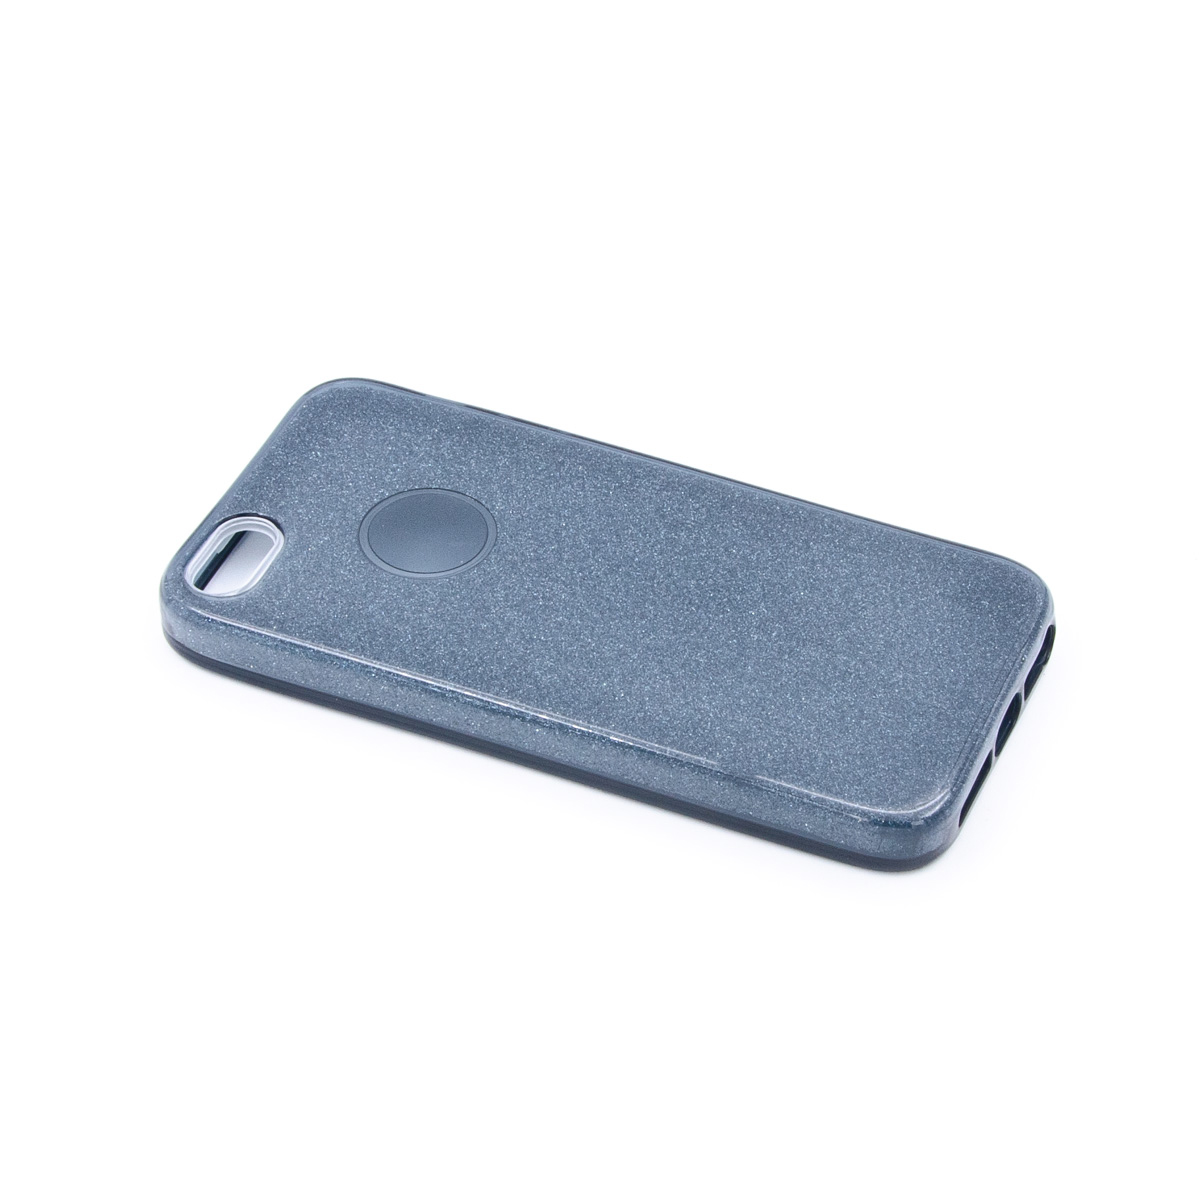 Tpu sparkly shine for iphone 5/5s/se (gray)